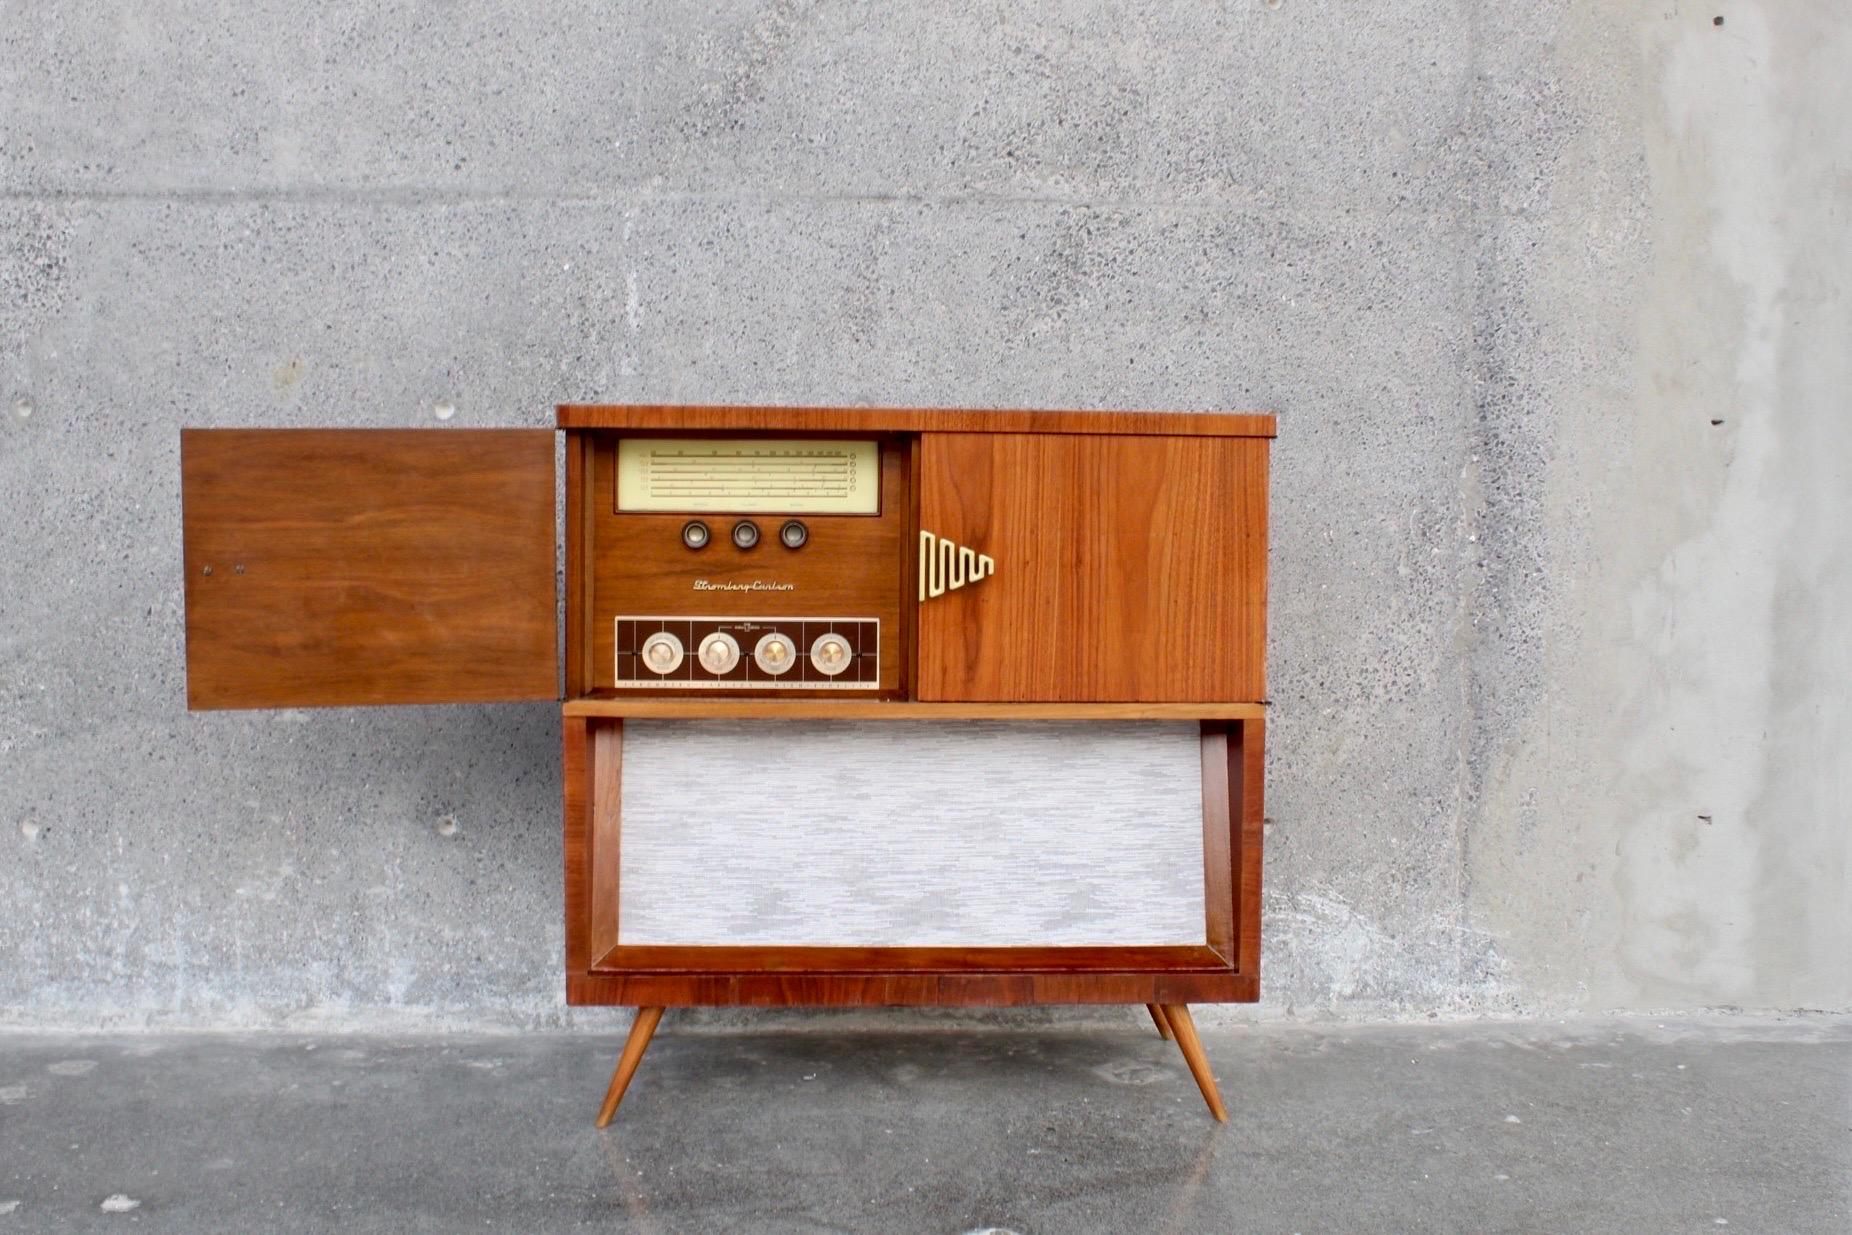 Spectacular mid-century console made in the early 1960s, all in walnut wood with some details in root veneer. We added new Bluetooth audio equipment as the original system we believe does not work. The entire exterior and interior was professionally